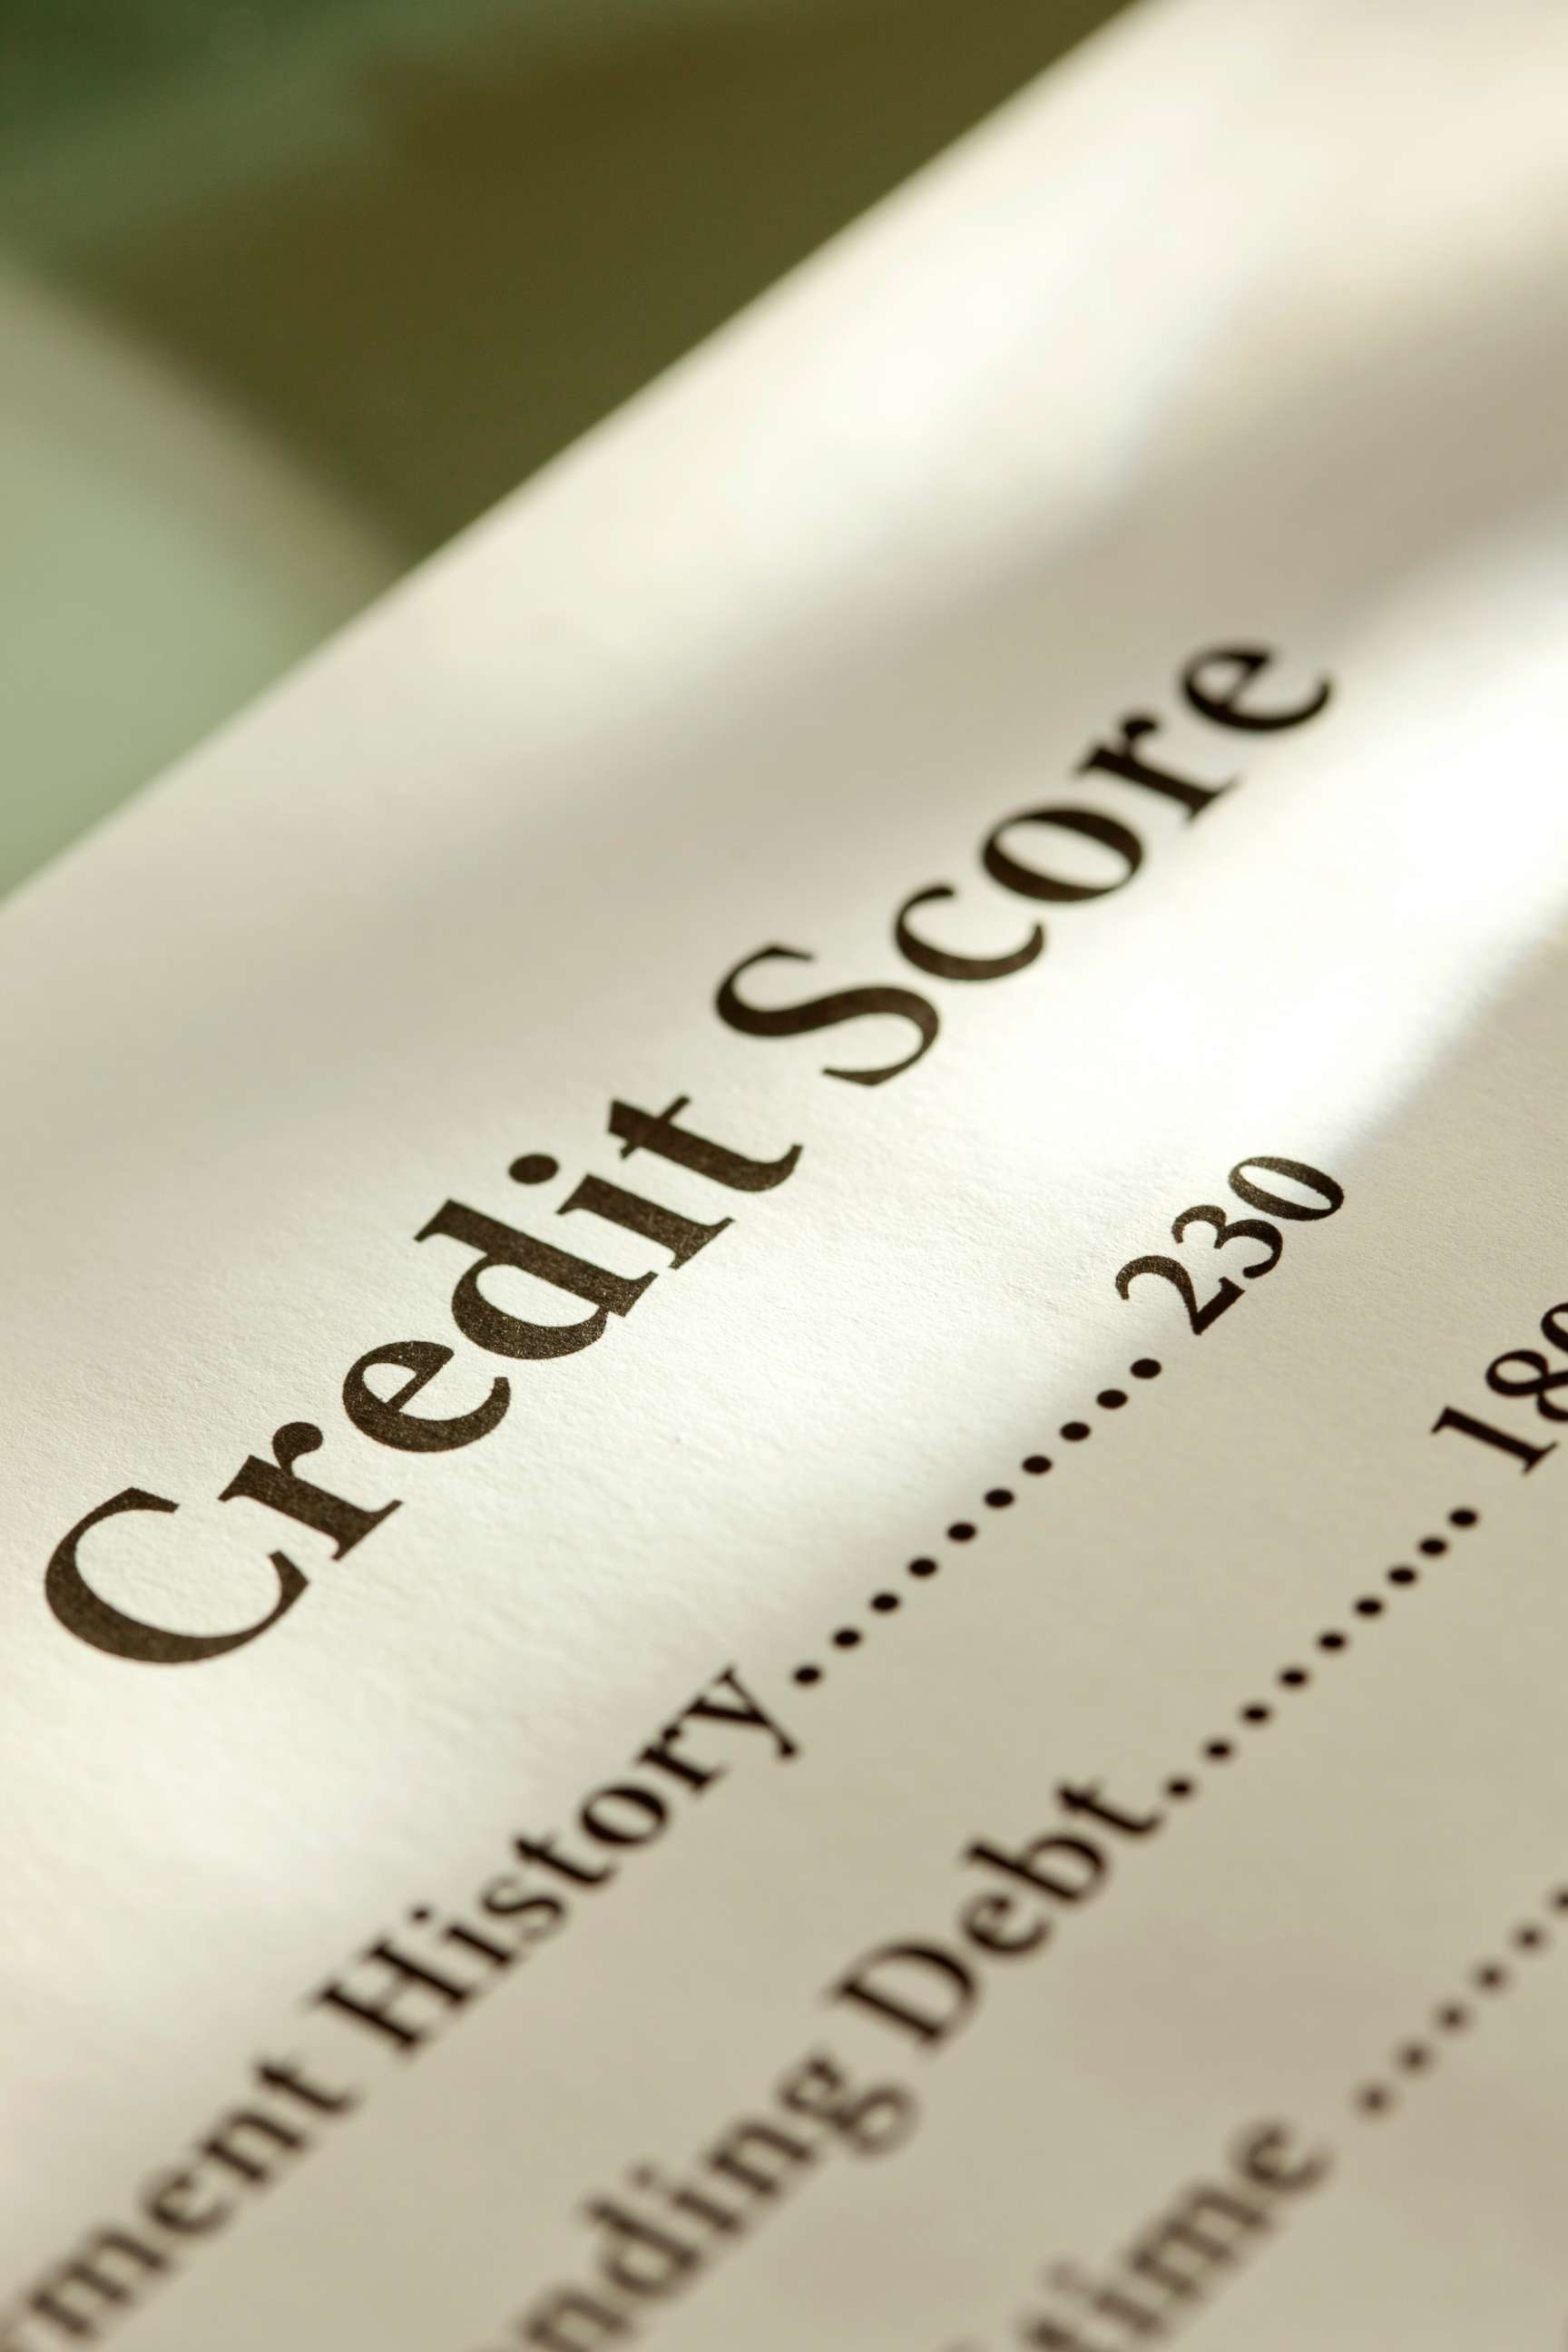 PHOTO: In this undated stock photo shows a credit score card.